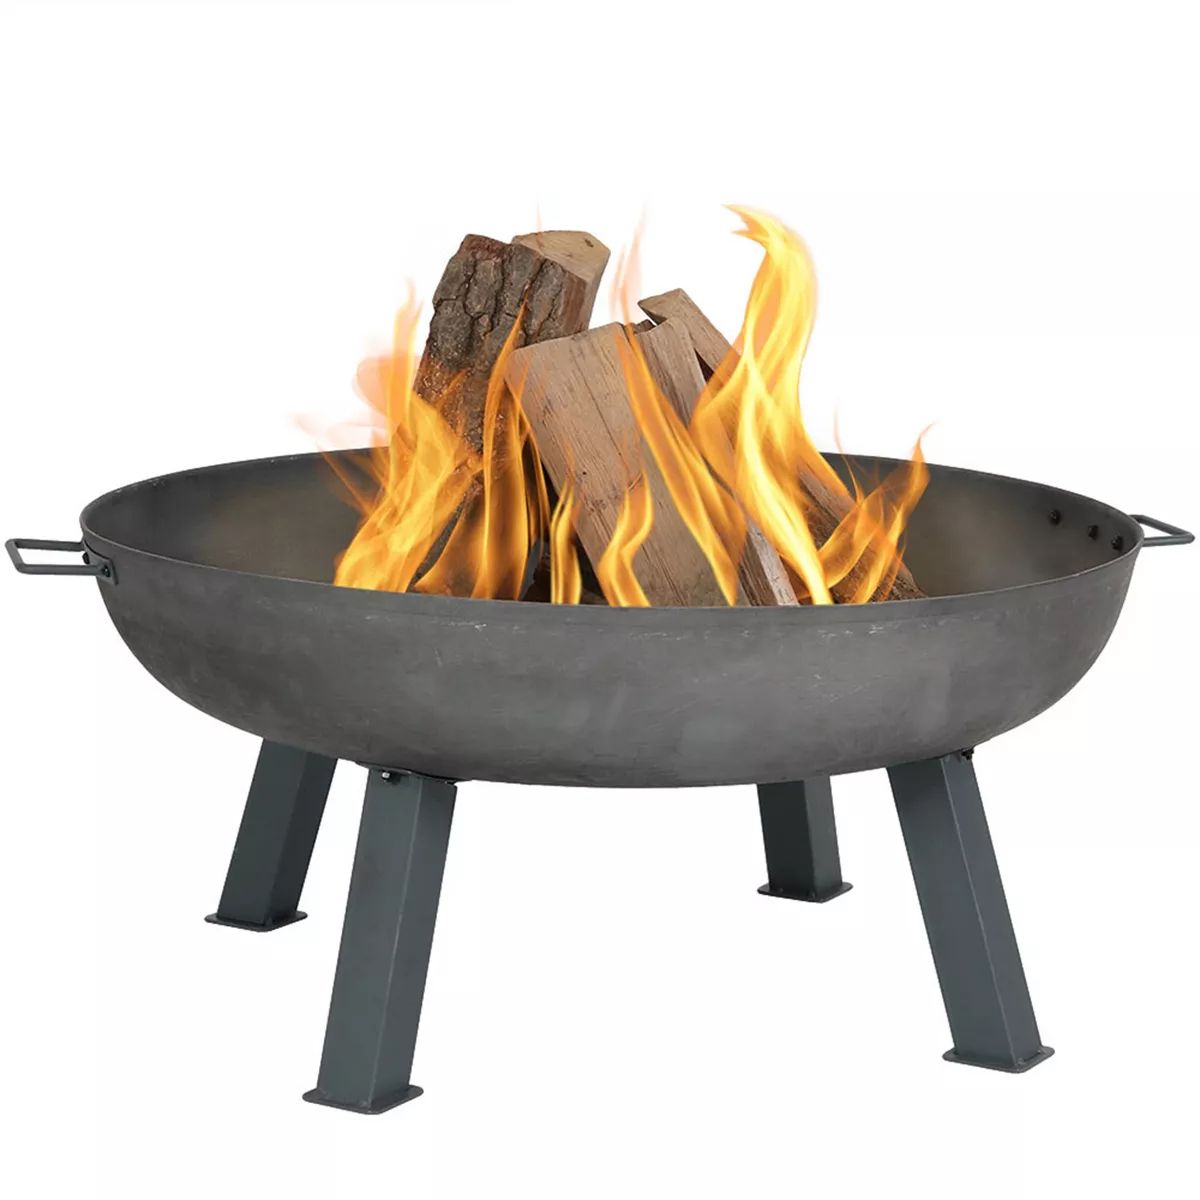 Sunnydaze Outdoor Camping or Backyard Round Cast Iron Rustic Fire Pit Bowl with Handles | Target